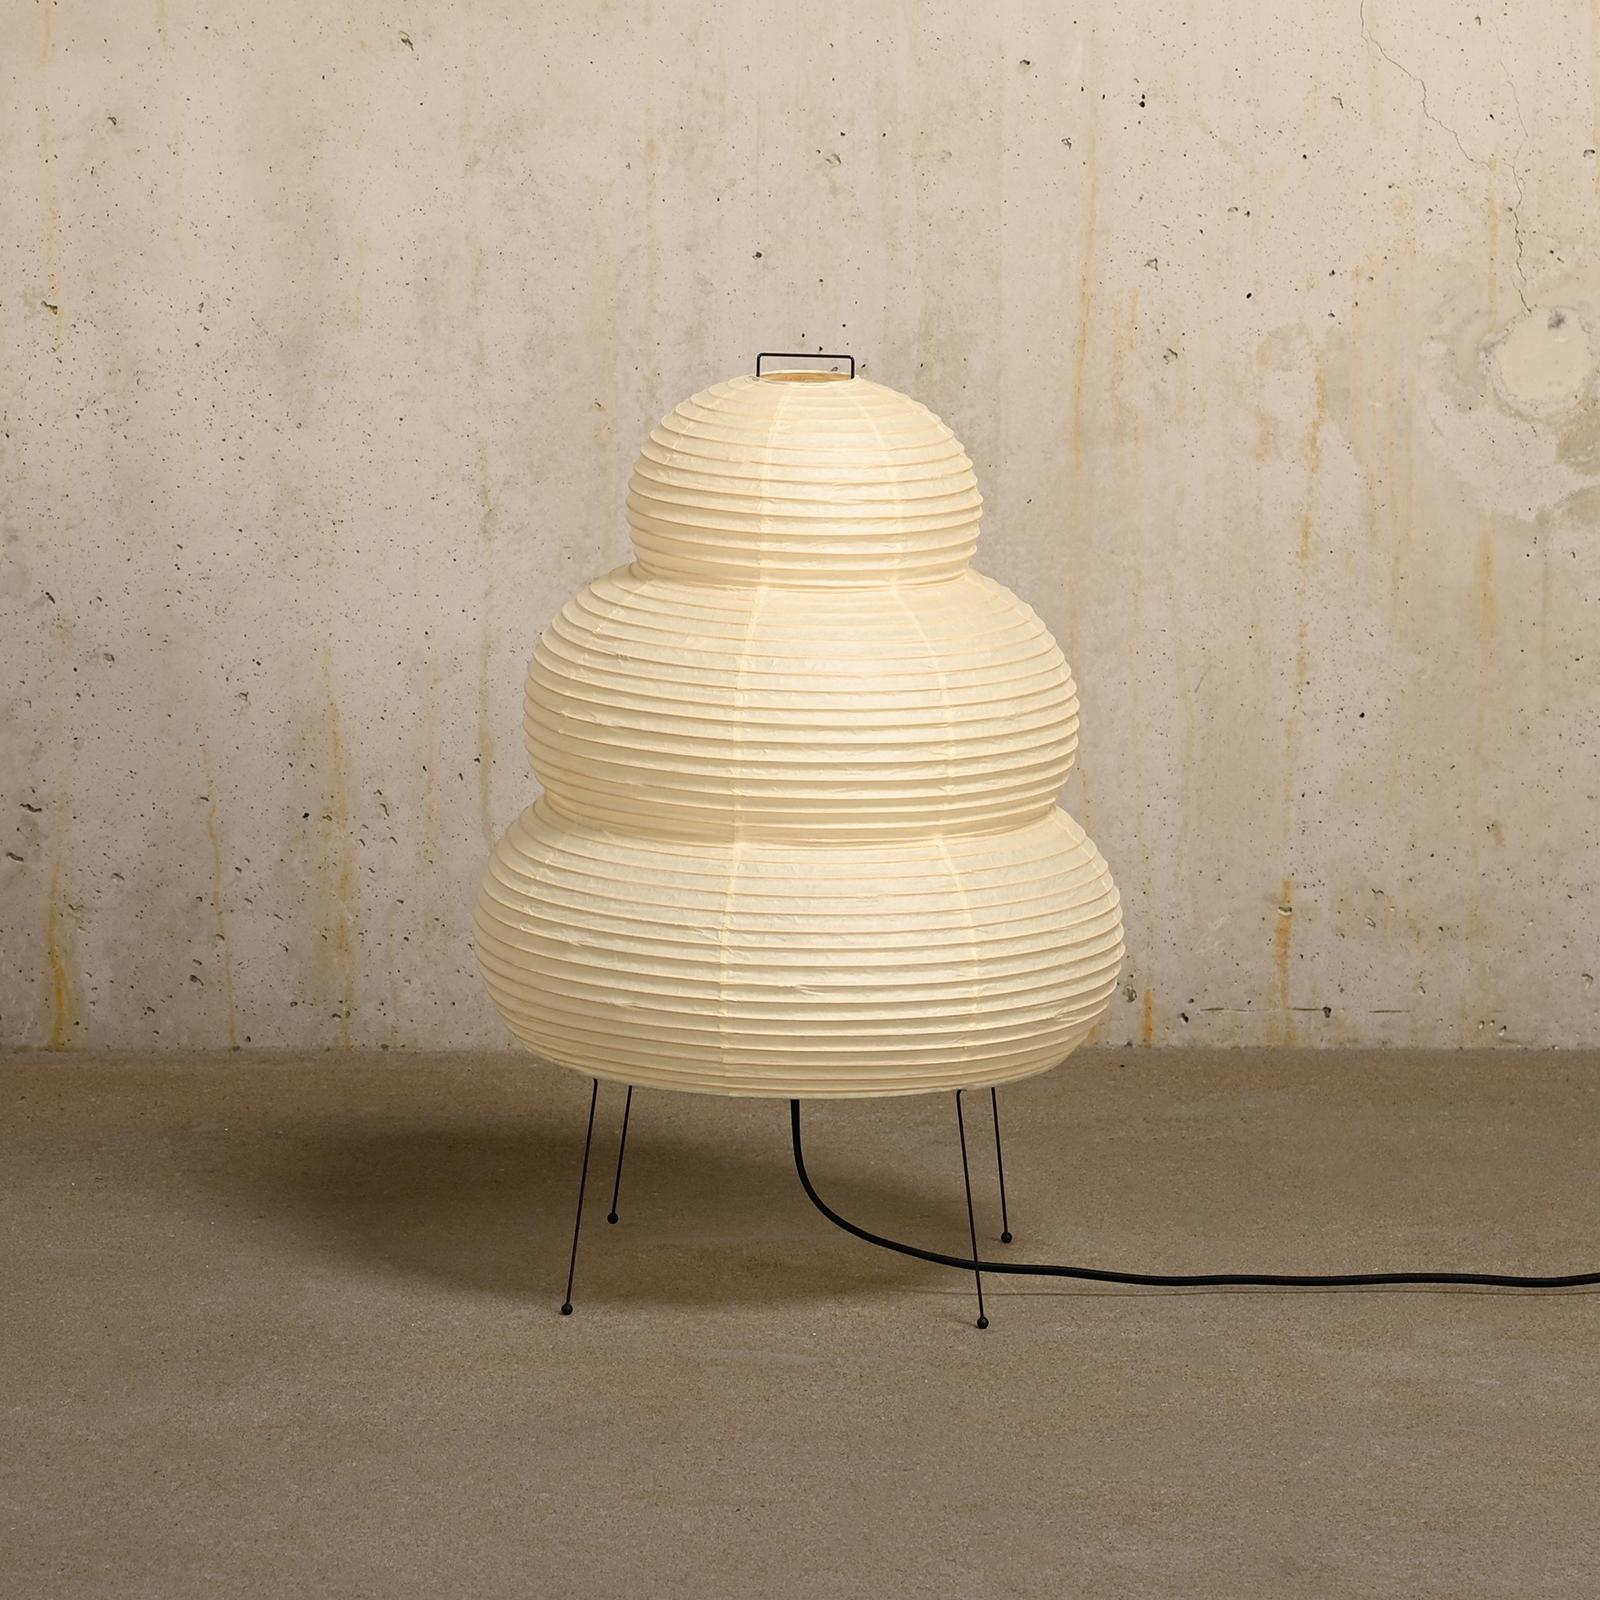 Iconic Akari light sculpture known as Model 24N designed by Isamu Noguchi and handcrafted from traditional washi paper. Each Akari lamp shade is meticulously crafted by hand in the Ozeki workshop, a traditional family-owned company, based in Gifu